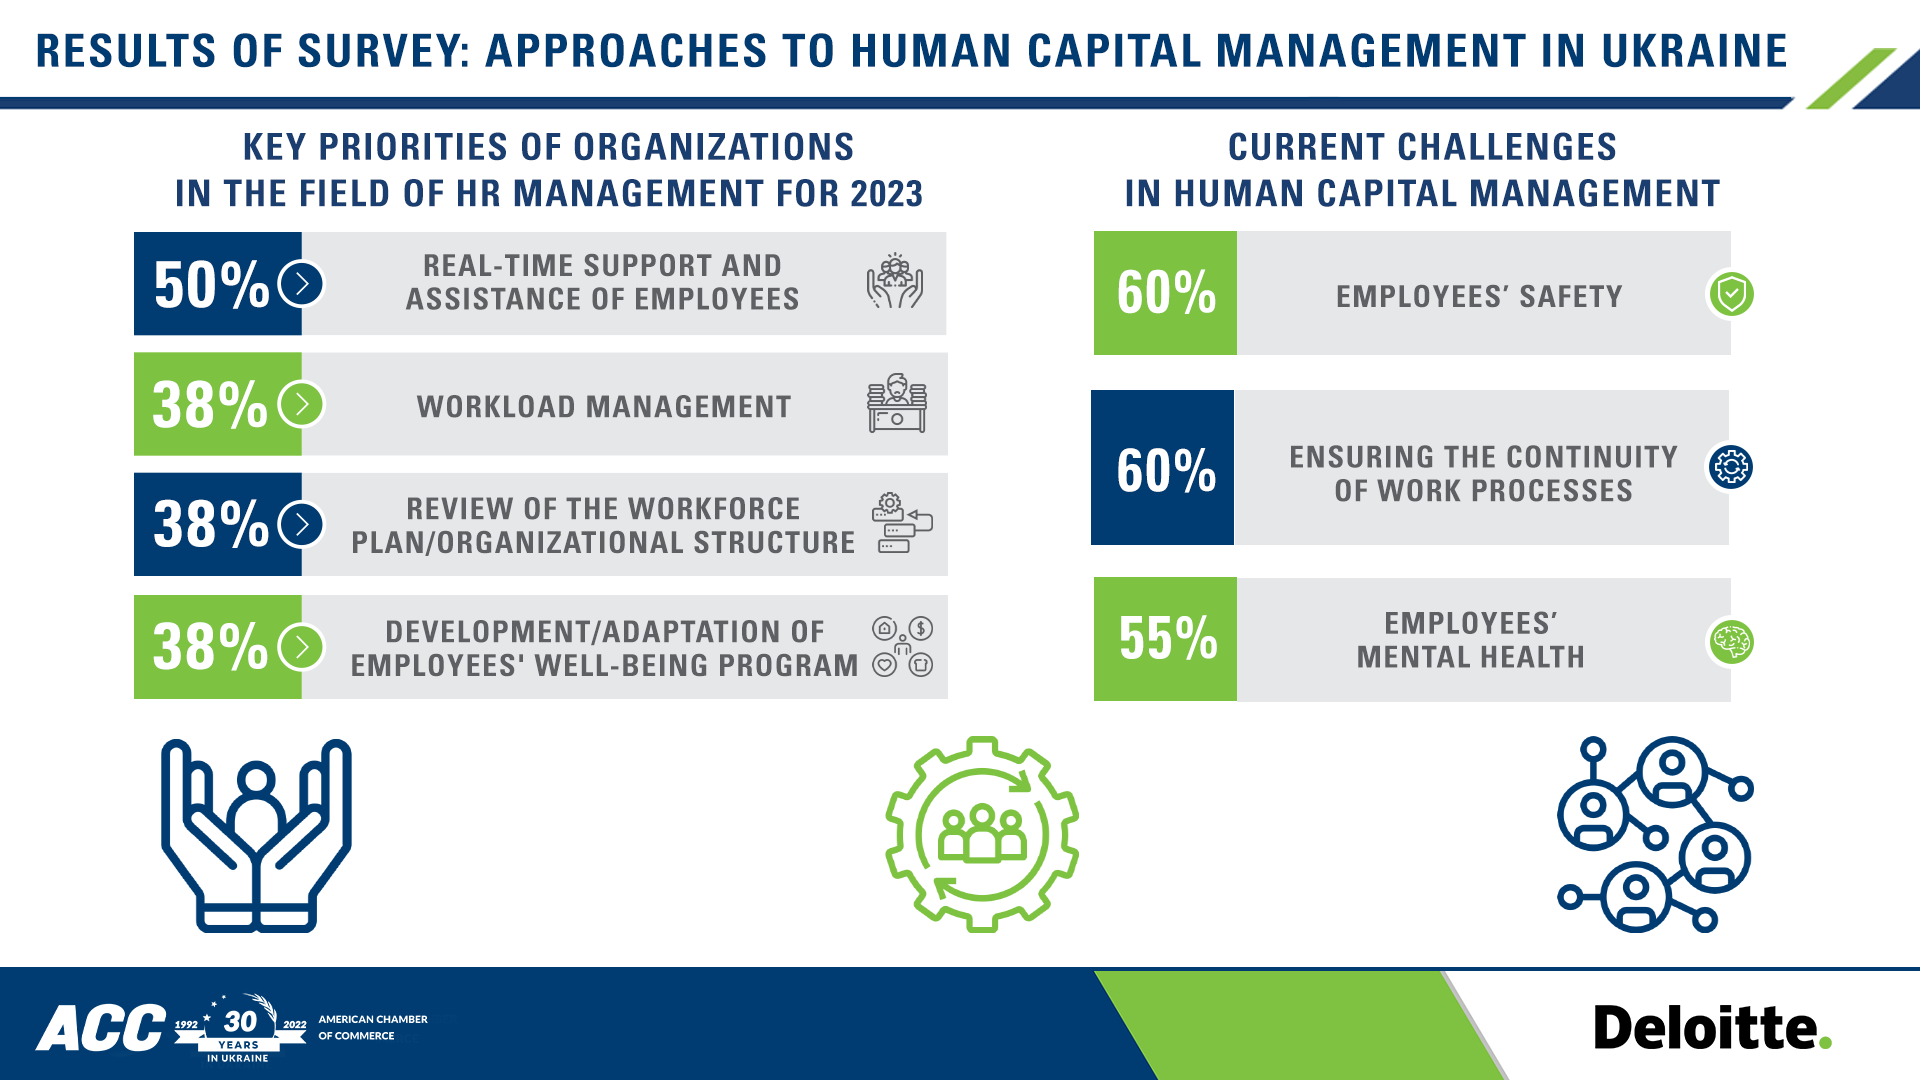 Employees’ safety and mental health support, work processes’ continuity are the main HR challenges for companies – new survey by AmCham Ukraine and Deloitte Ukraine